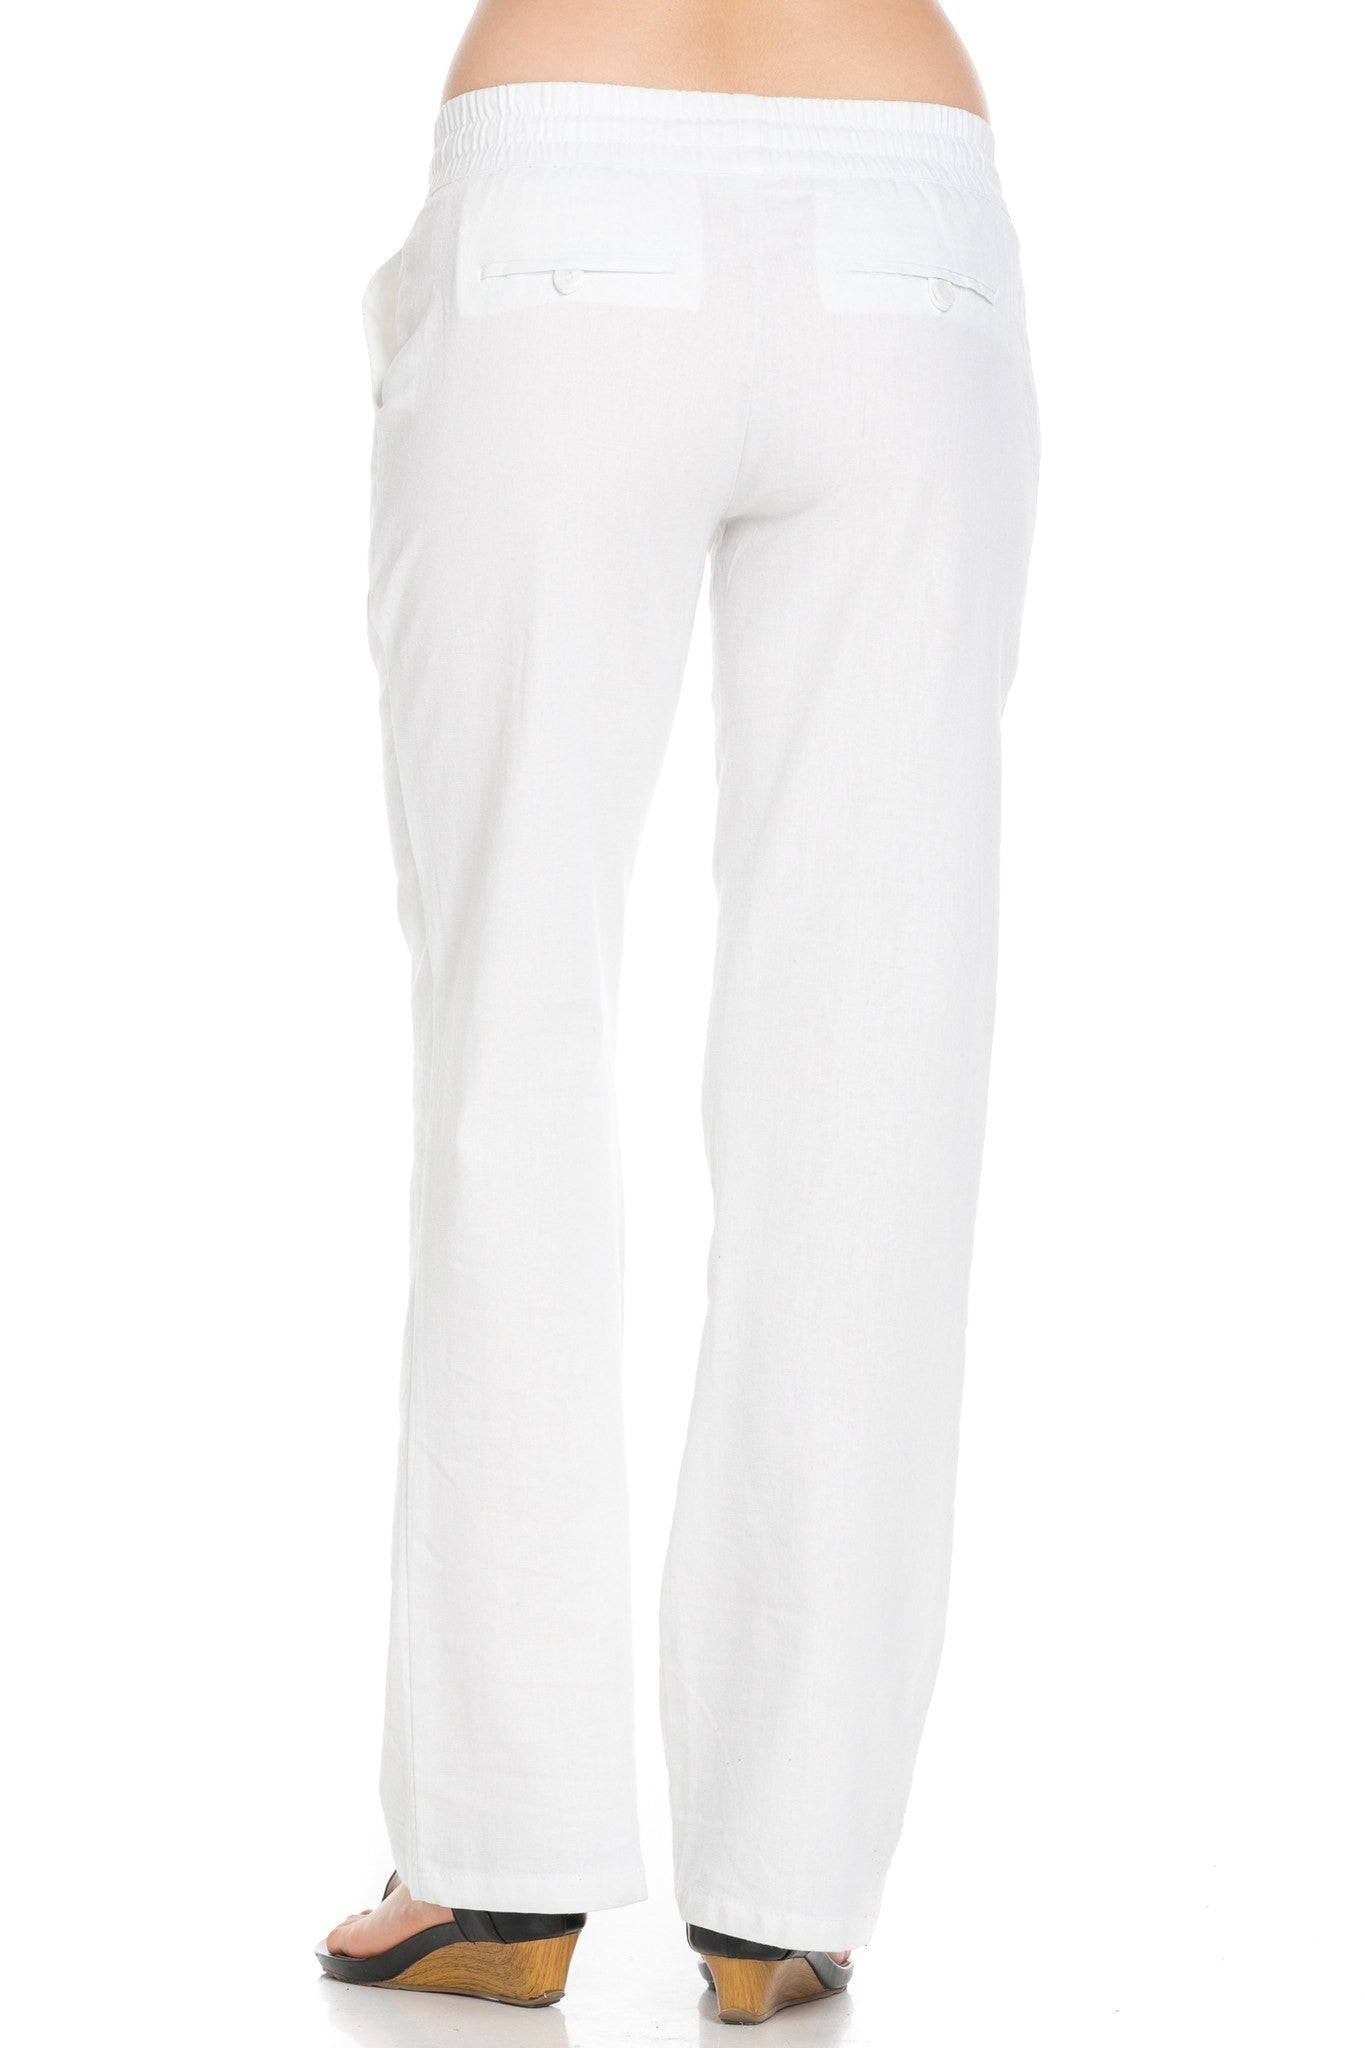 Comfy Drawstring Linen Pants Long with Band Waist (White) - Poplooks